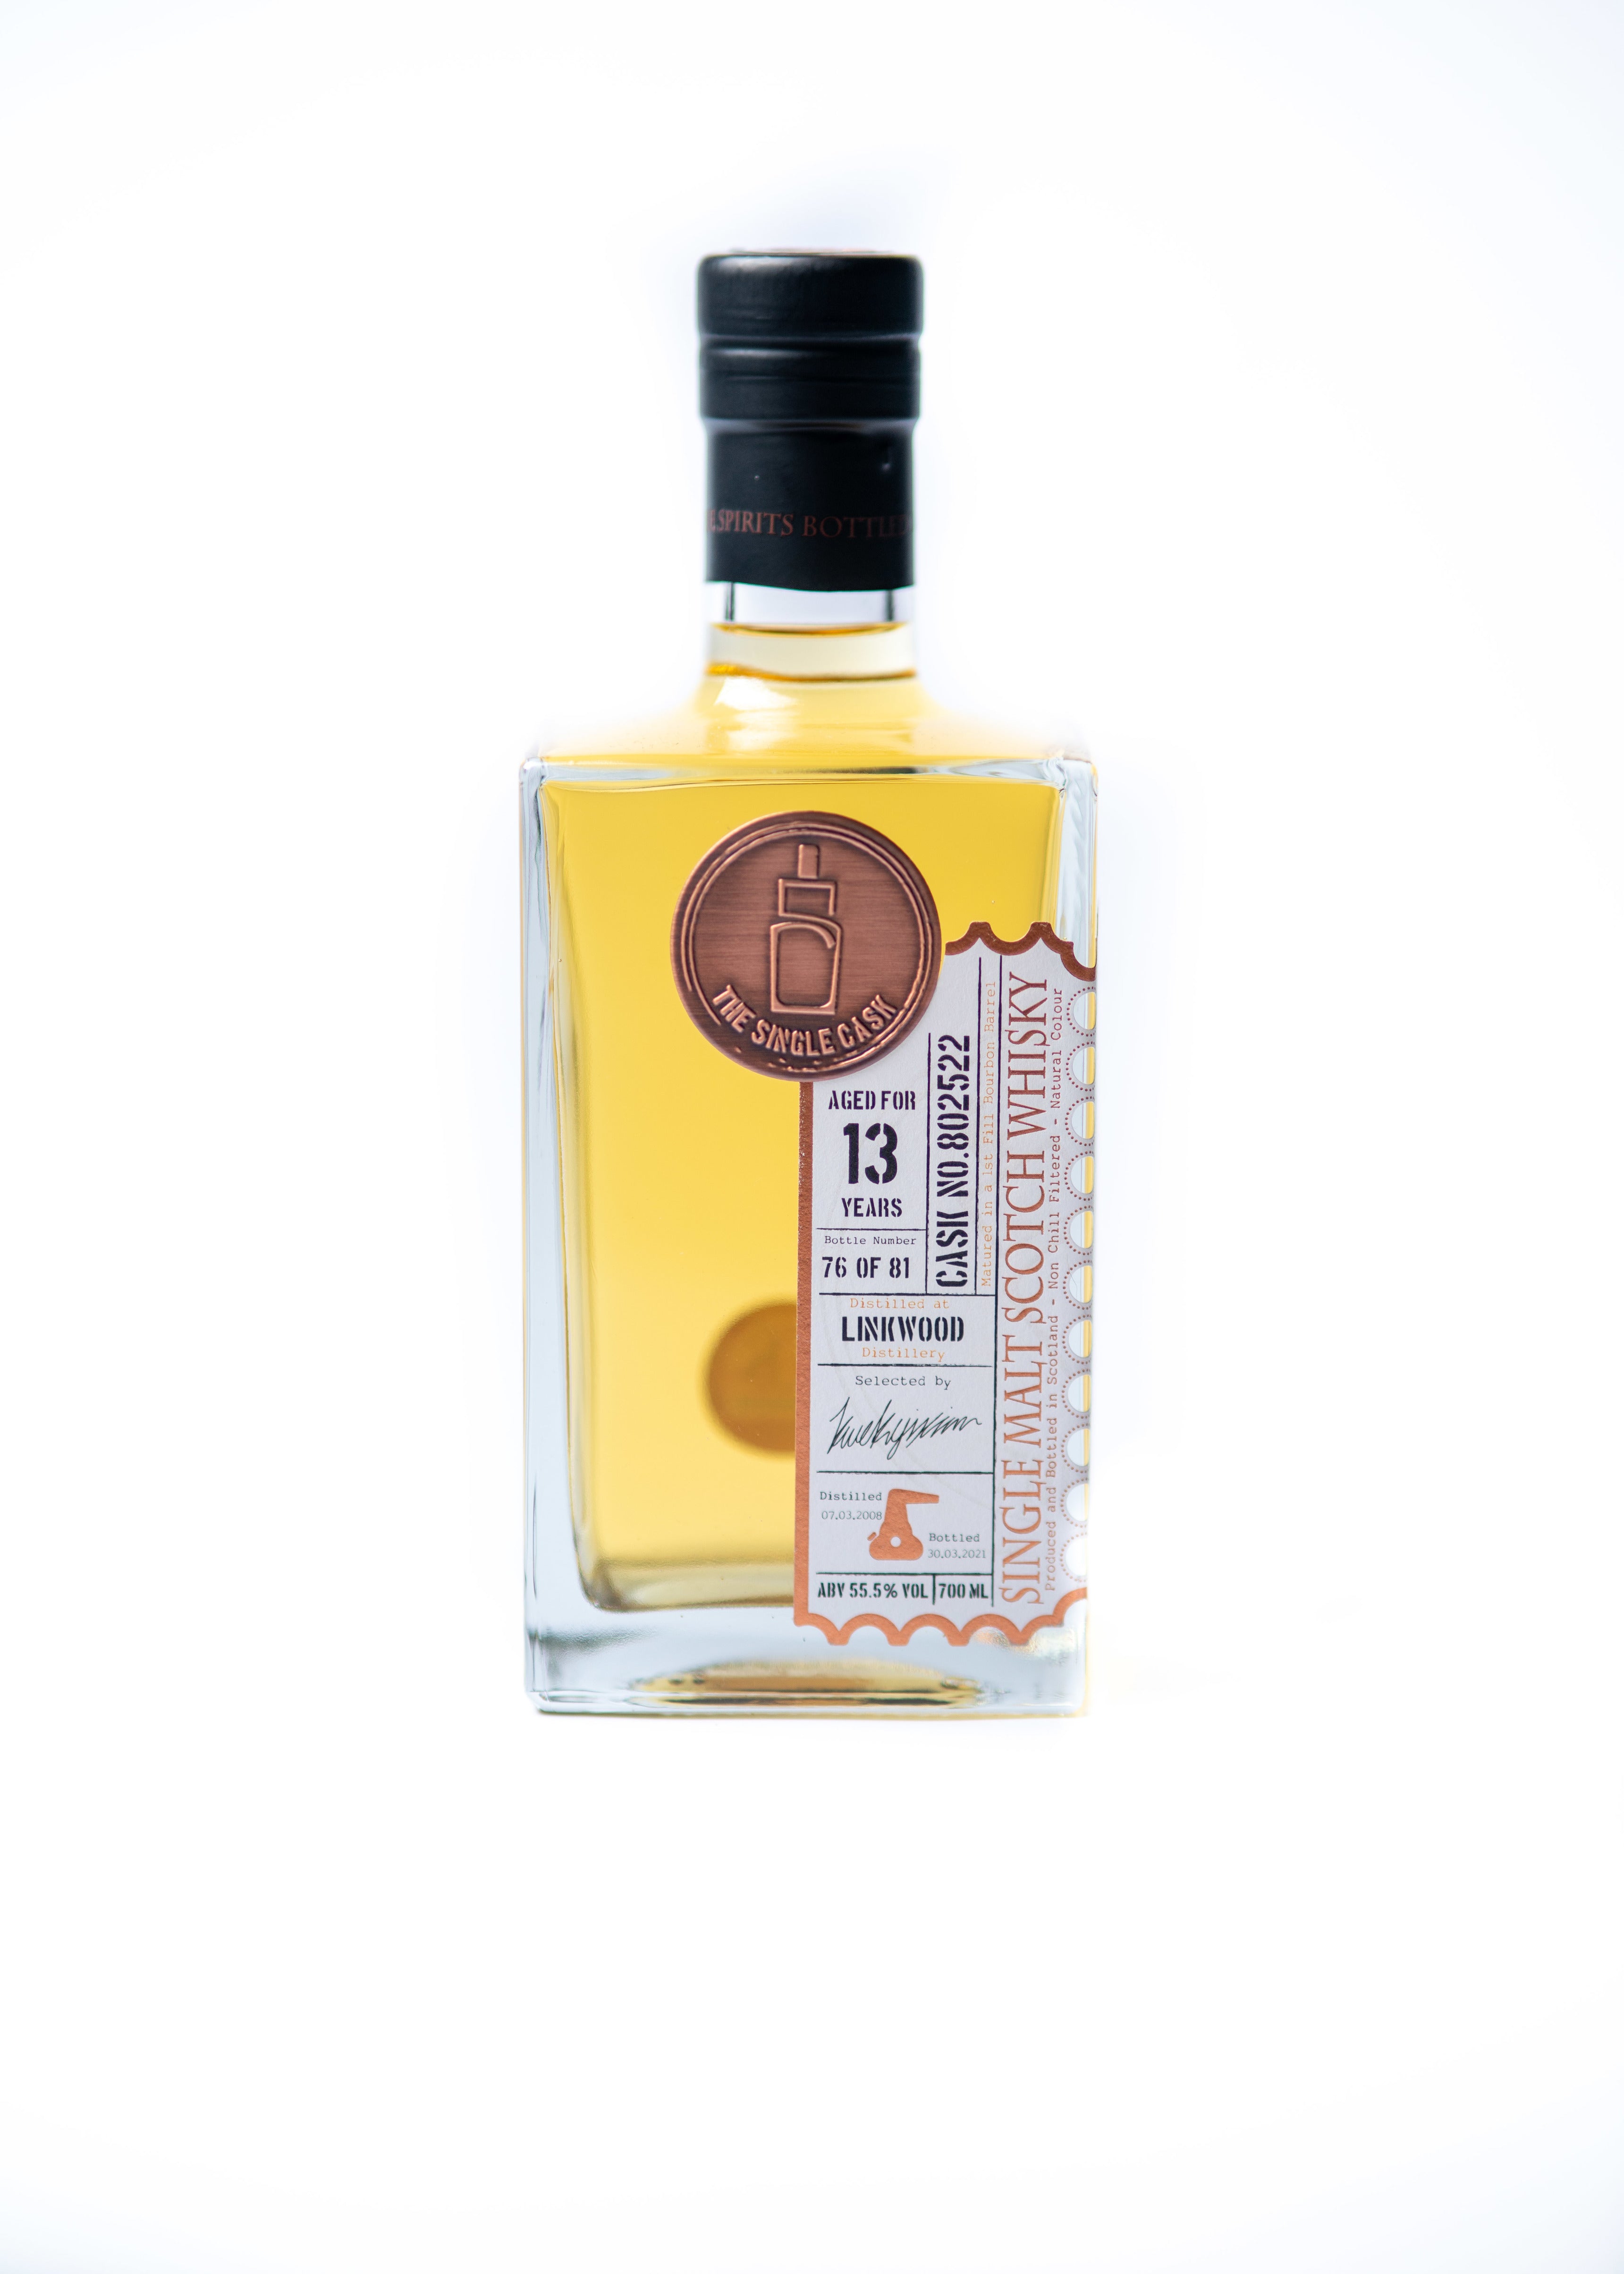 The Single Cask Linkwood 13 years old scotch whisky